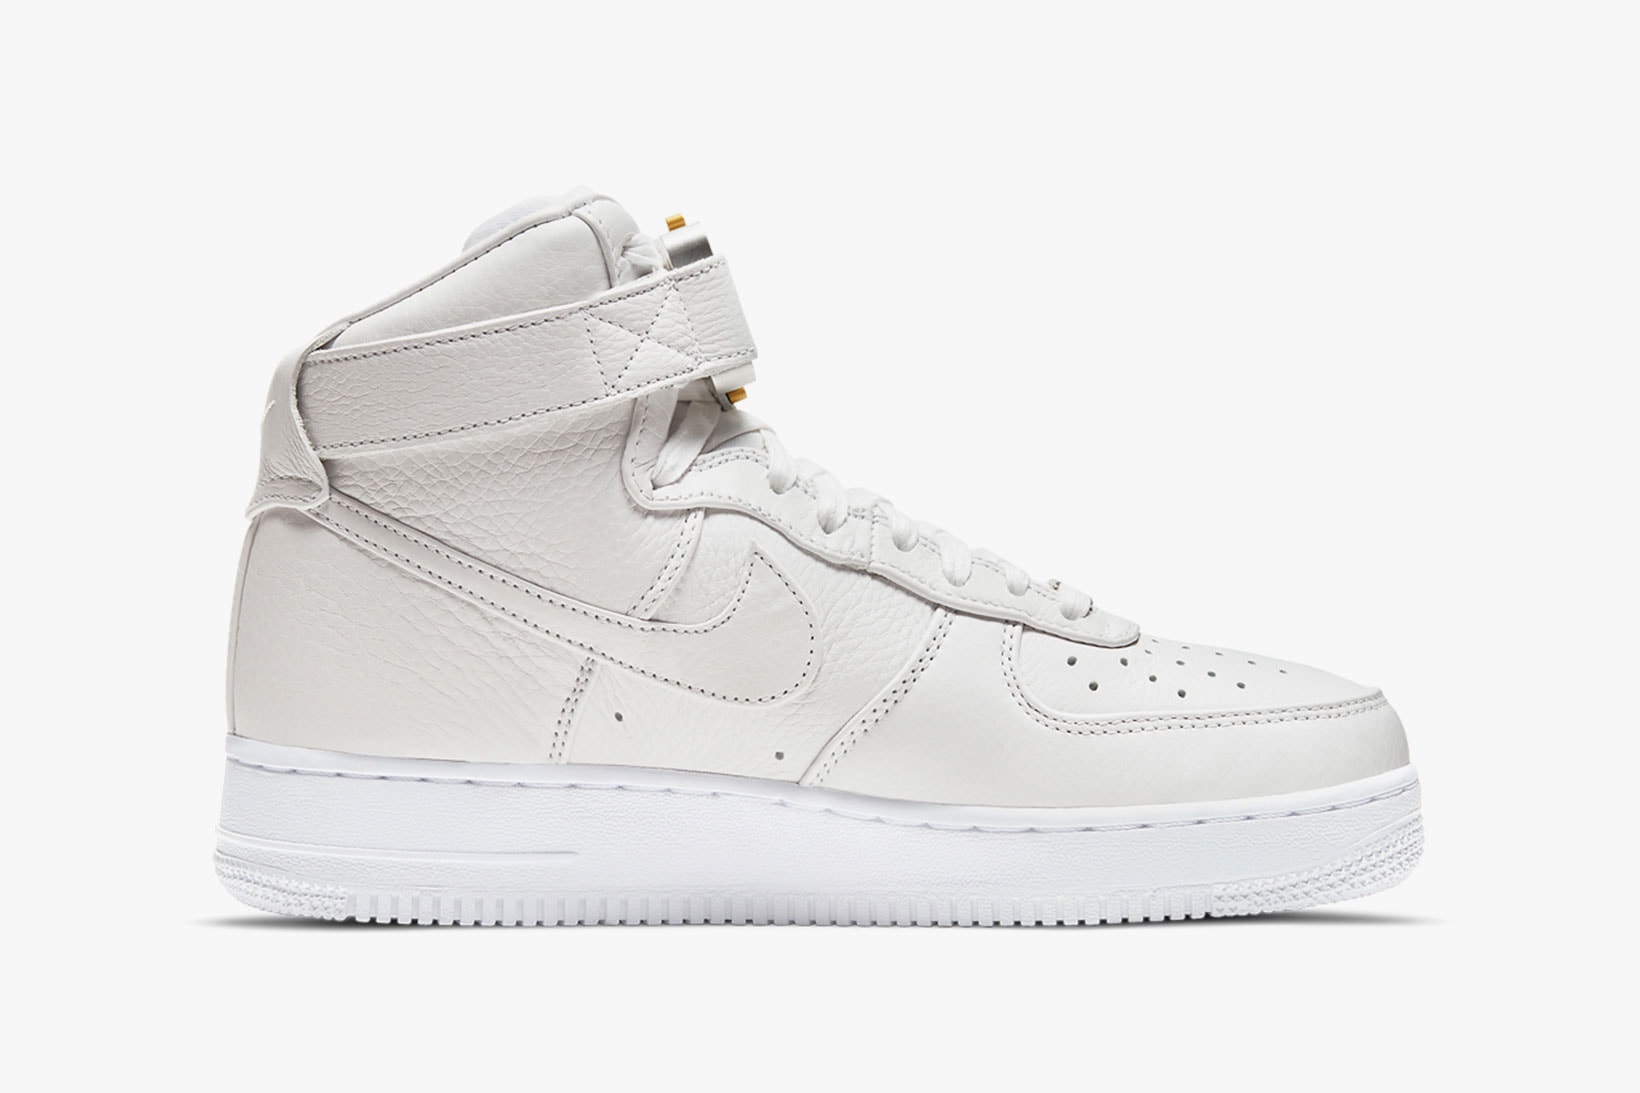 1017 alyx 9sm nike air force 1 af1 high collaboration white black sneakers release date matthew williams